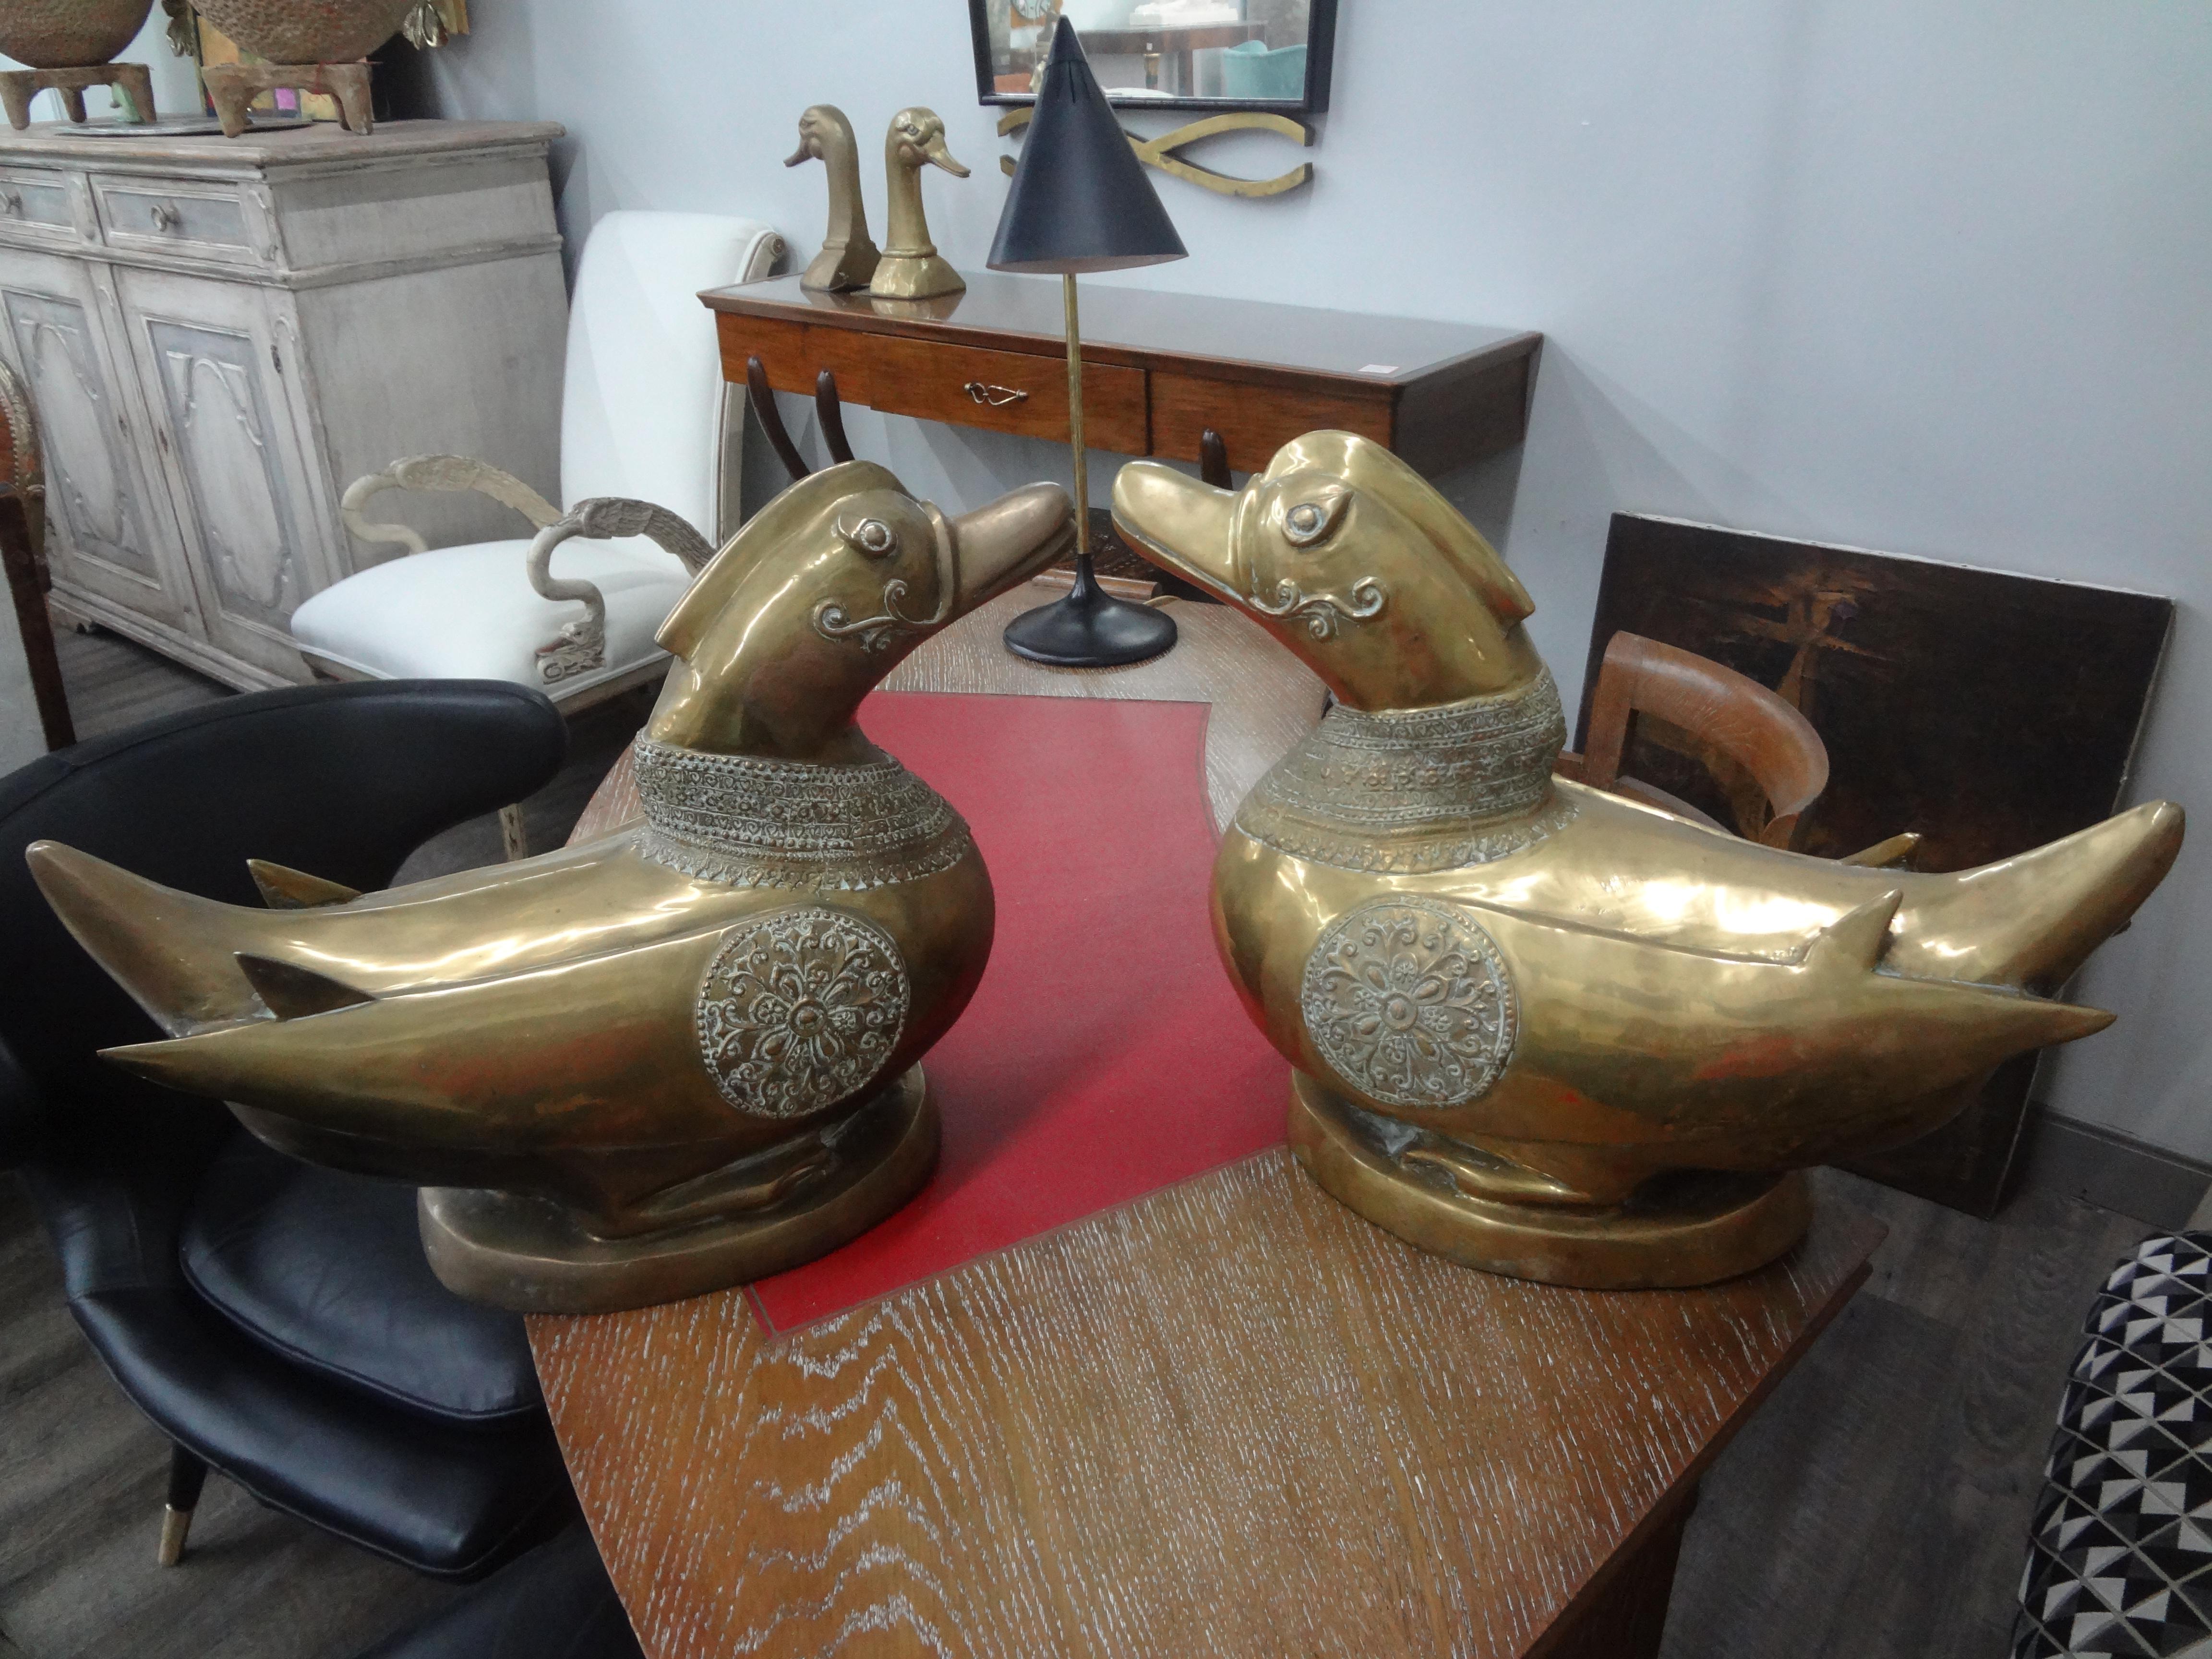 Pair of Anglo Indian brass ducks.
We offer a large pair of Hollywood Regency/Anglo-Indian brass duck sculptures or figures with beautiful incised detail.
Unusual accessory, nice patina!